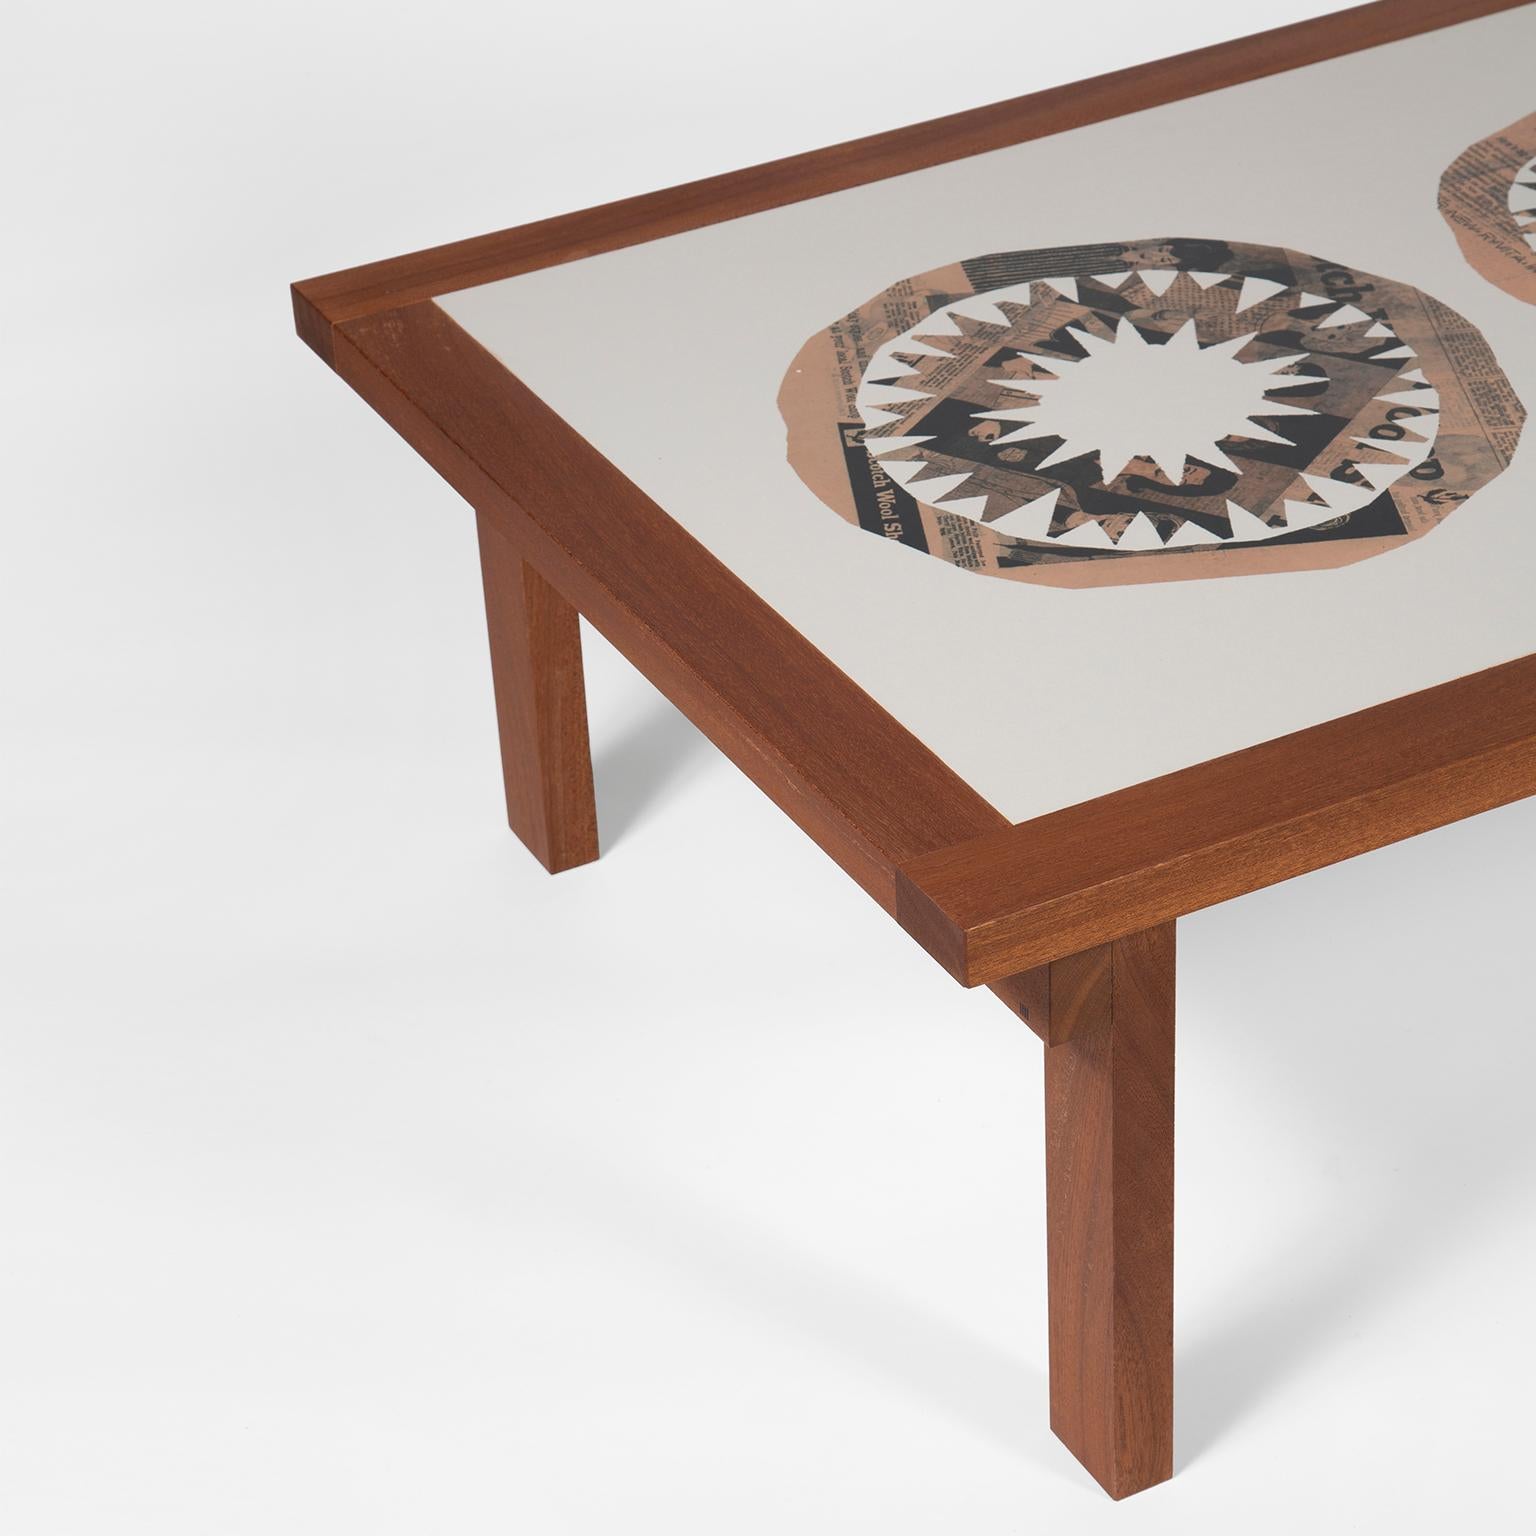 Triple Star Table by DANAD Design 'Peter Blake', Contemporary In New Condition For Sale In London, GB